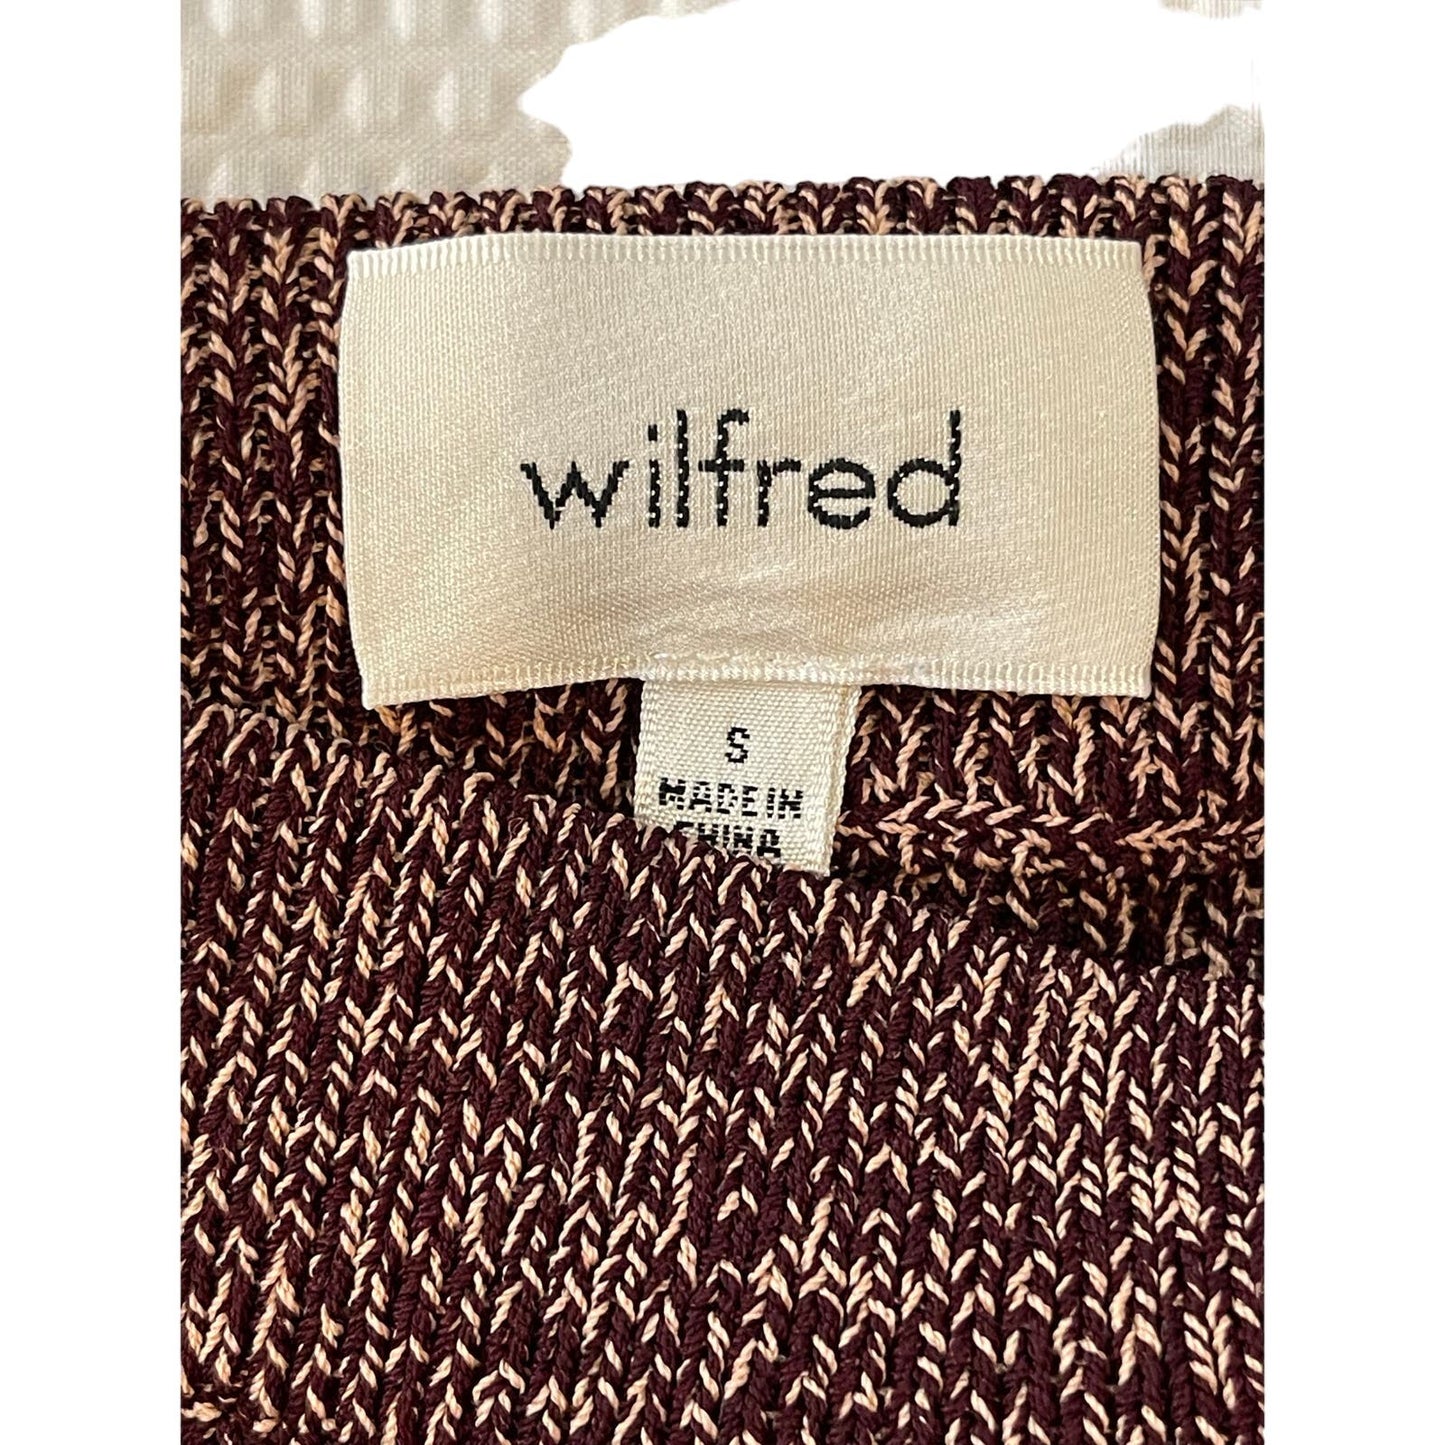 Wilfred Heavy Knit Maroon and Beige Skirt Women's Size Small